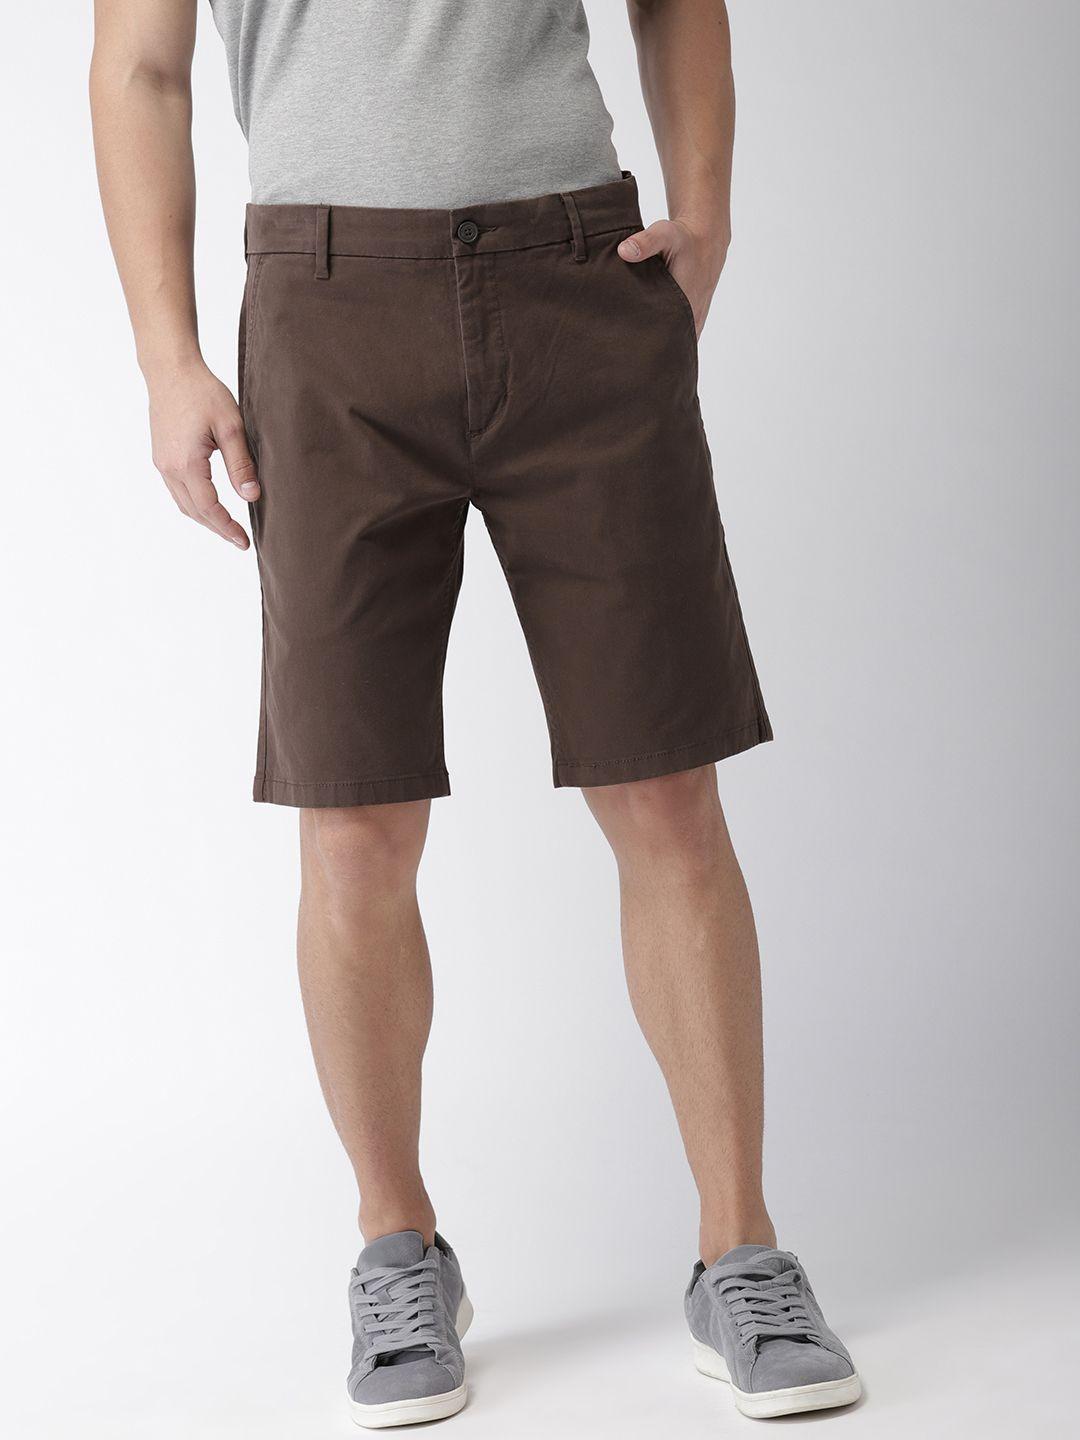 levis-men-brown-solid-regular-tapered-fit-chino-shorts-502